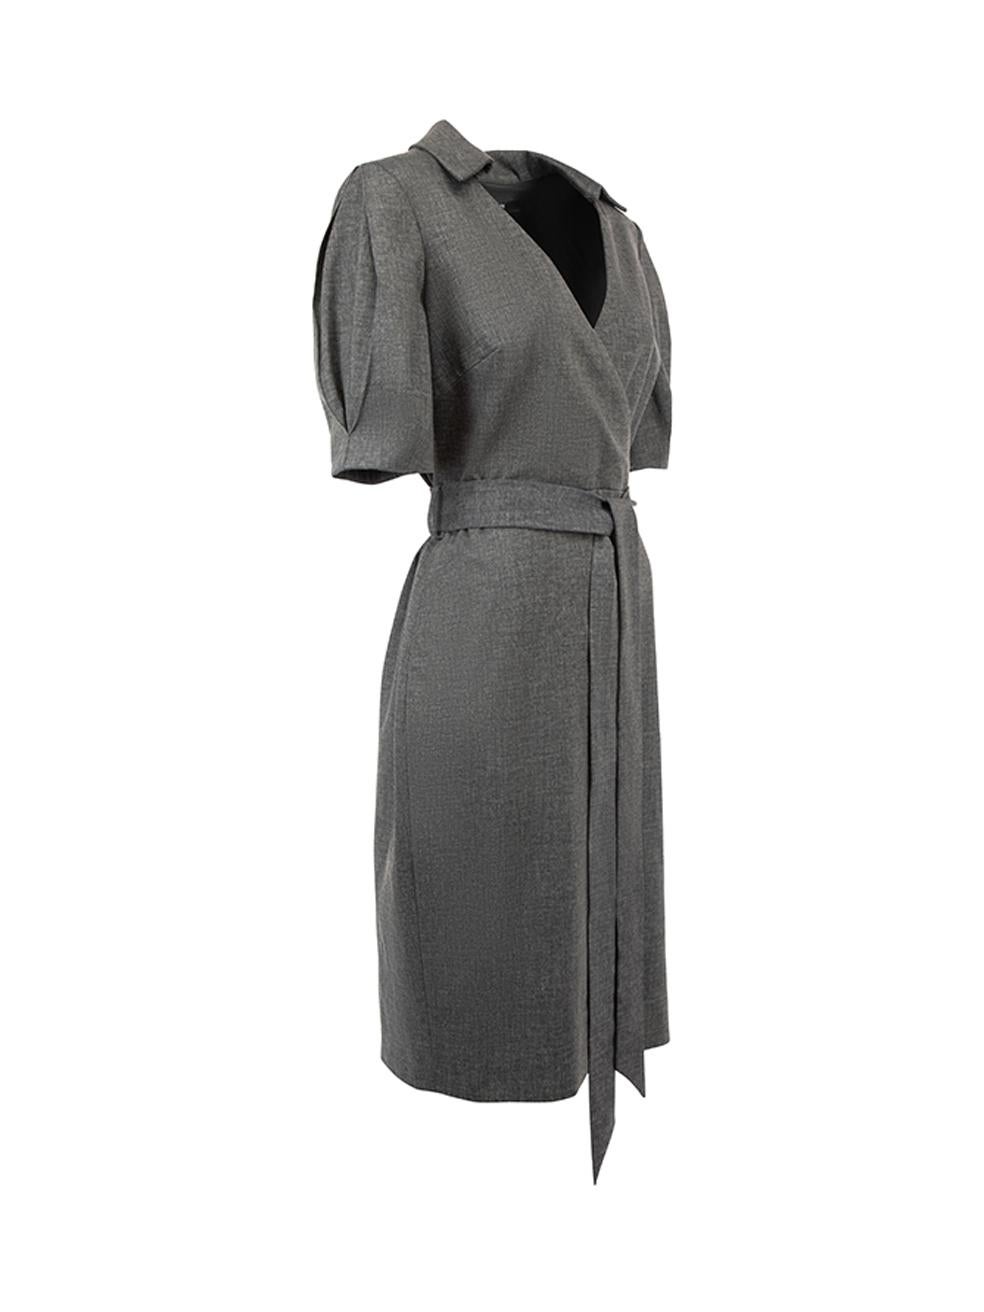 CONDITION is Very good. Hardly any visible wear to dress is evident on this used Badgley Mischka designer resale item. 
 
 Details
  Grey
 Wool
 Knee length dress
 V neckline
 Wrap front with collar design
 Back zip closure with hook and eye
